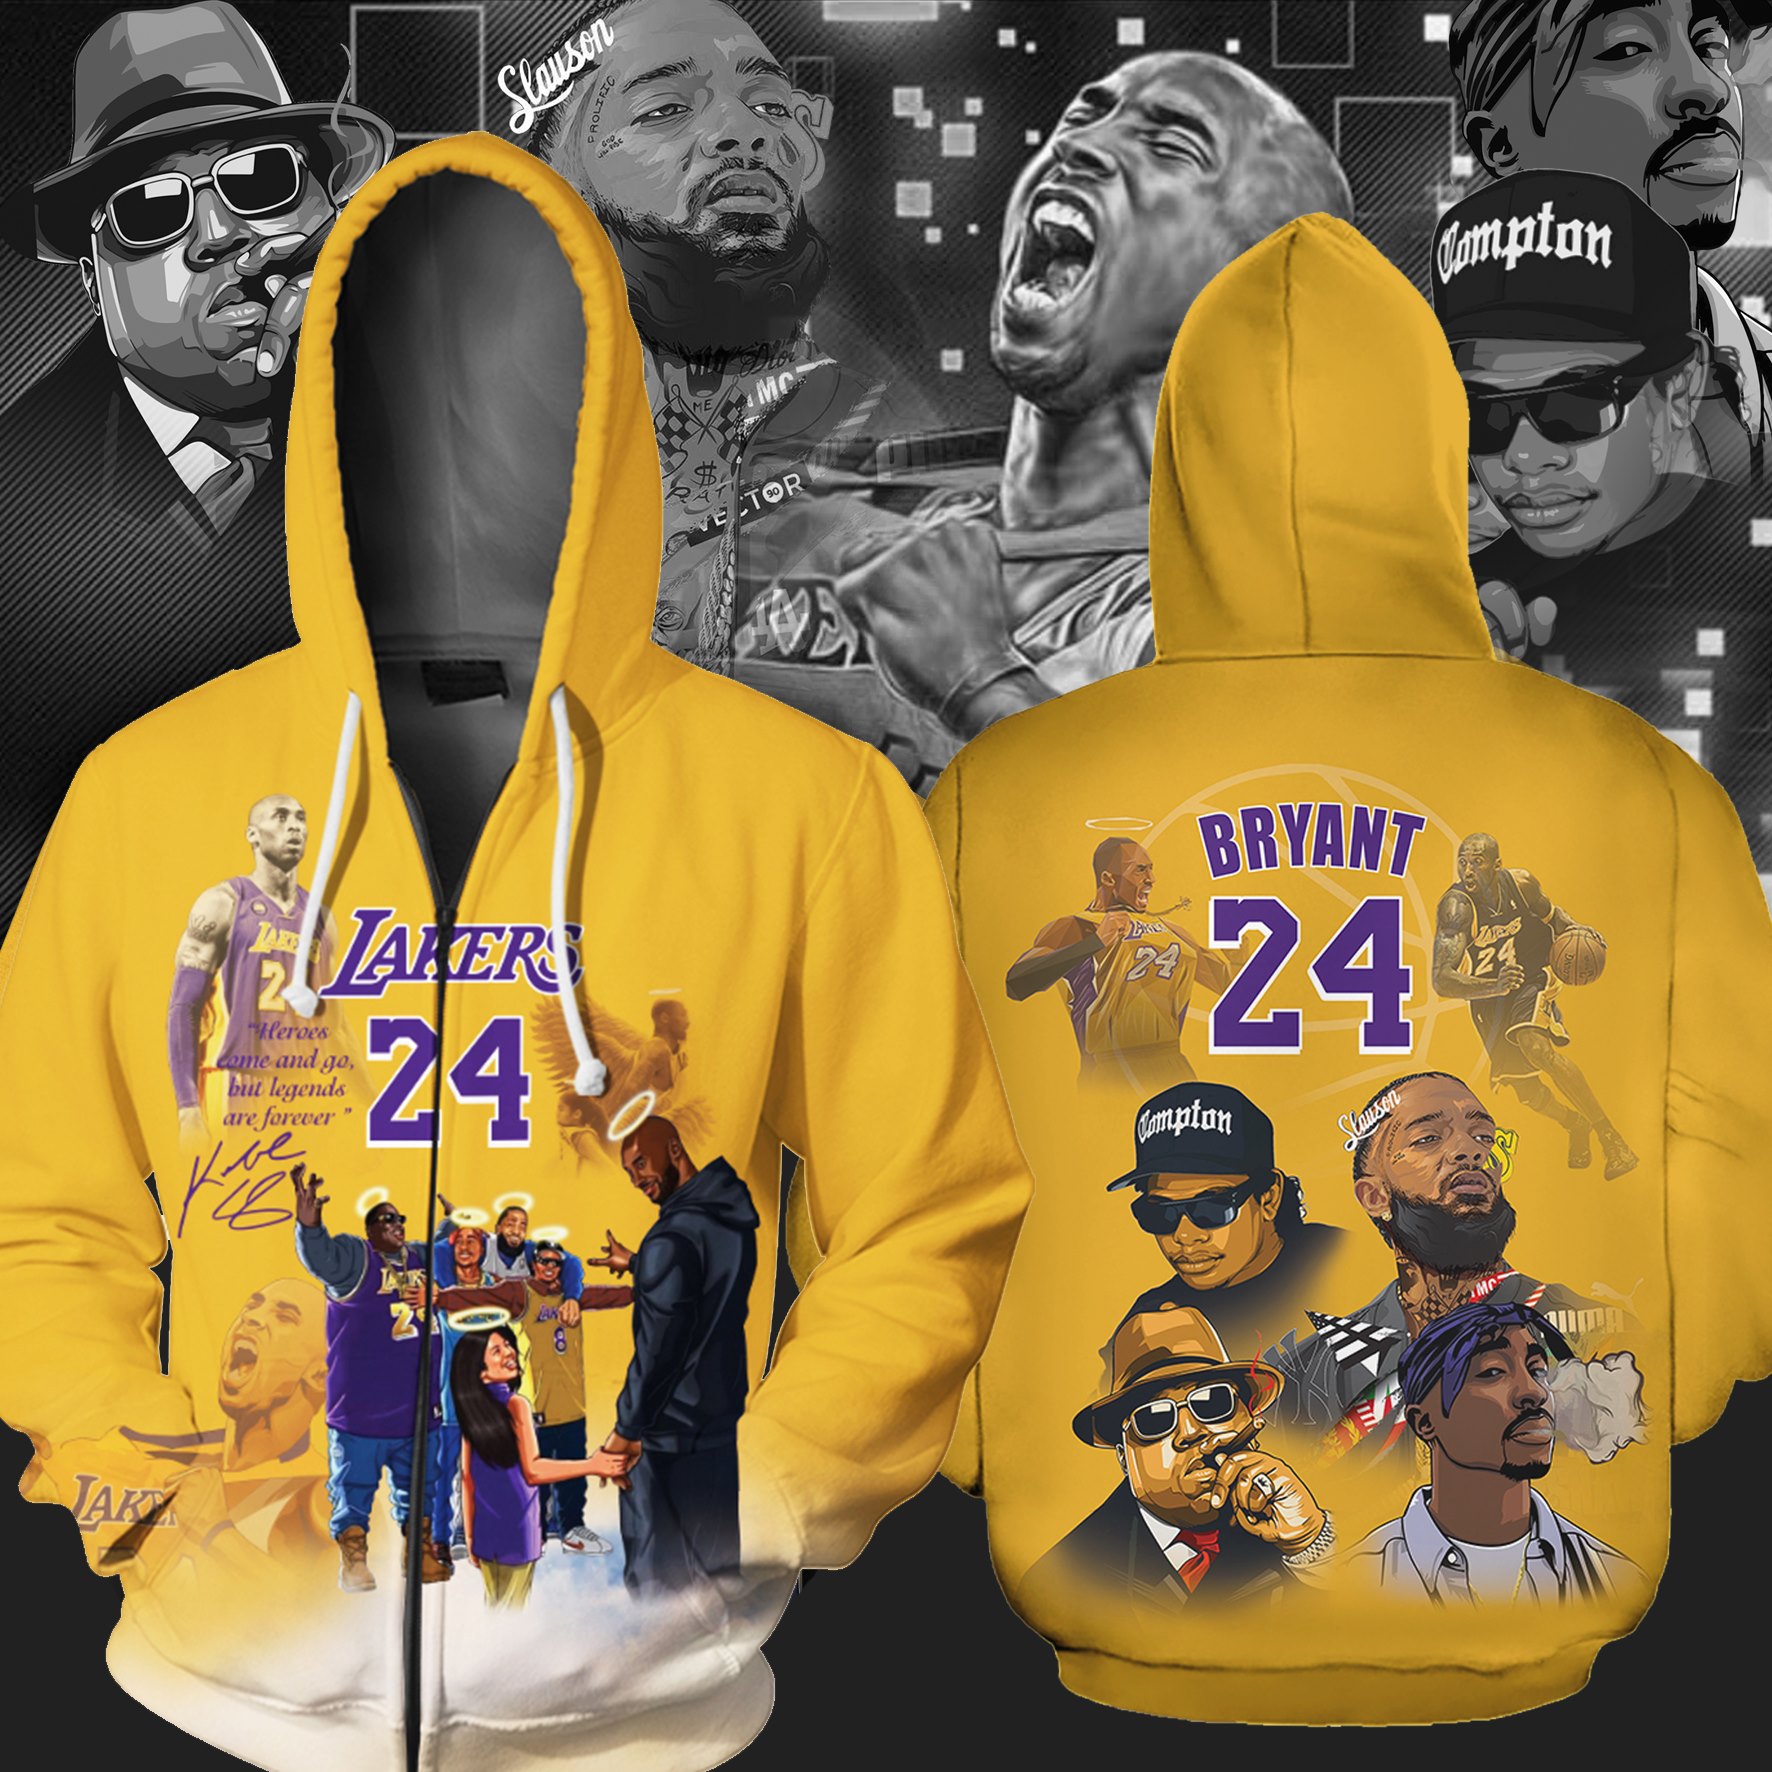 lakers 24. heroes come and go, but legends are forever. bryant 24. compton. slauson.